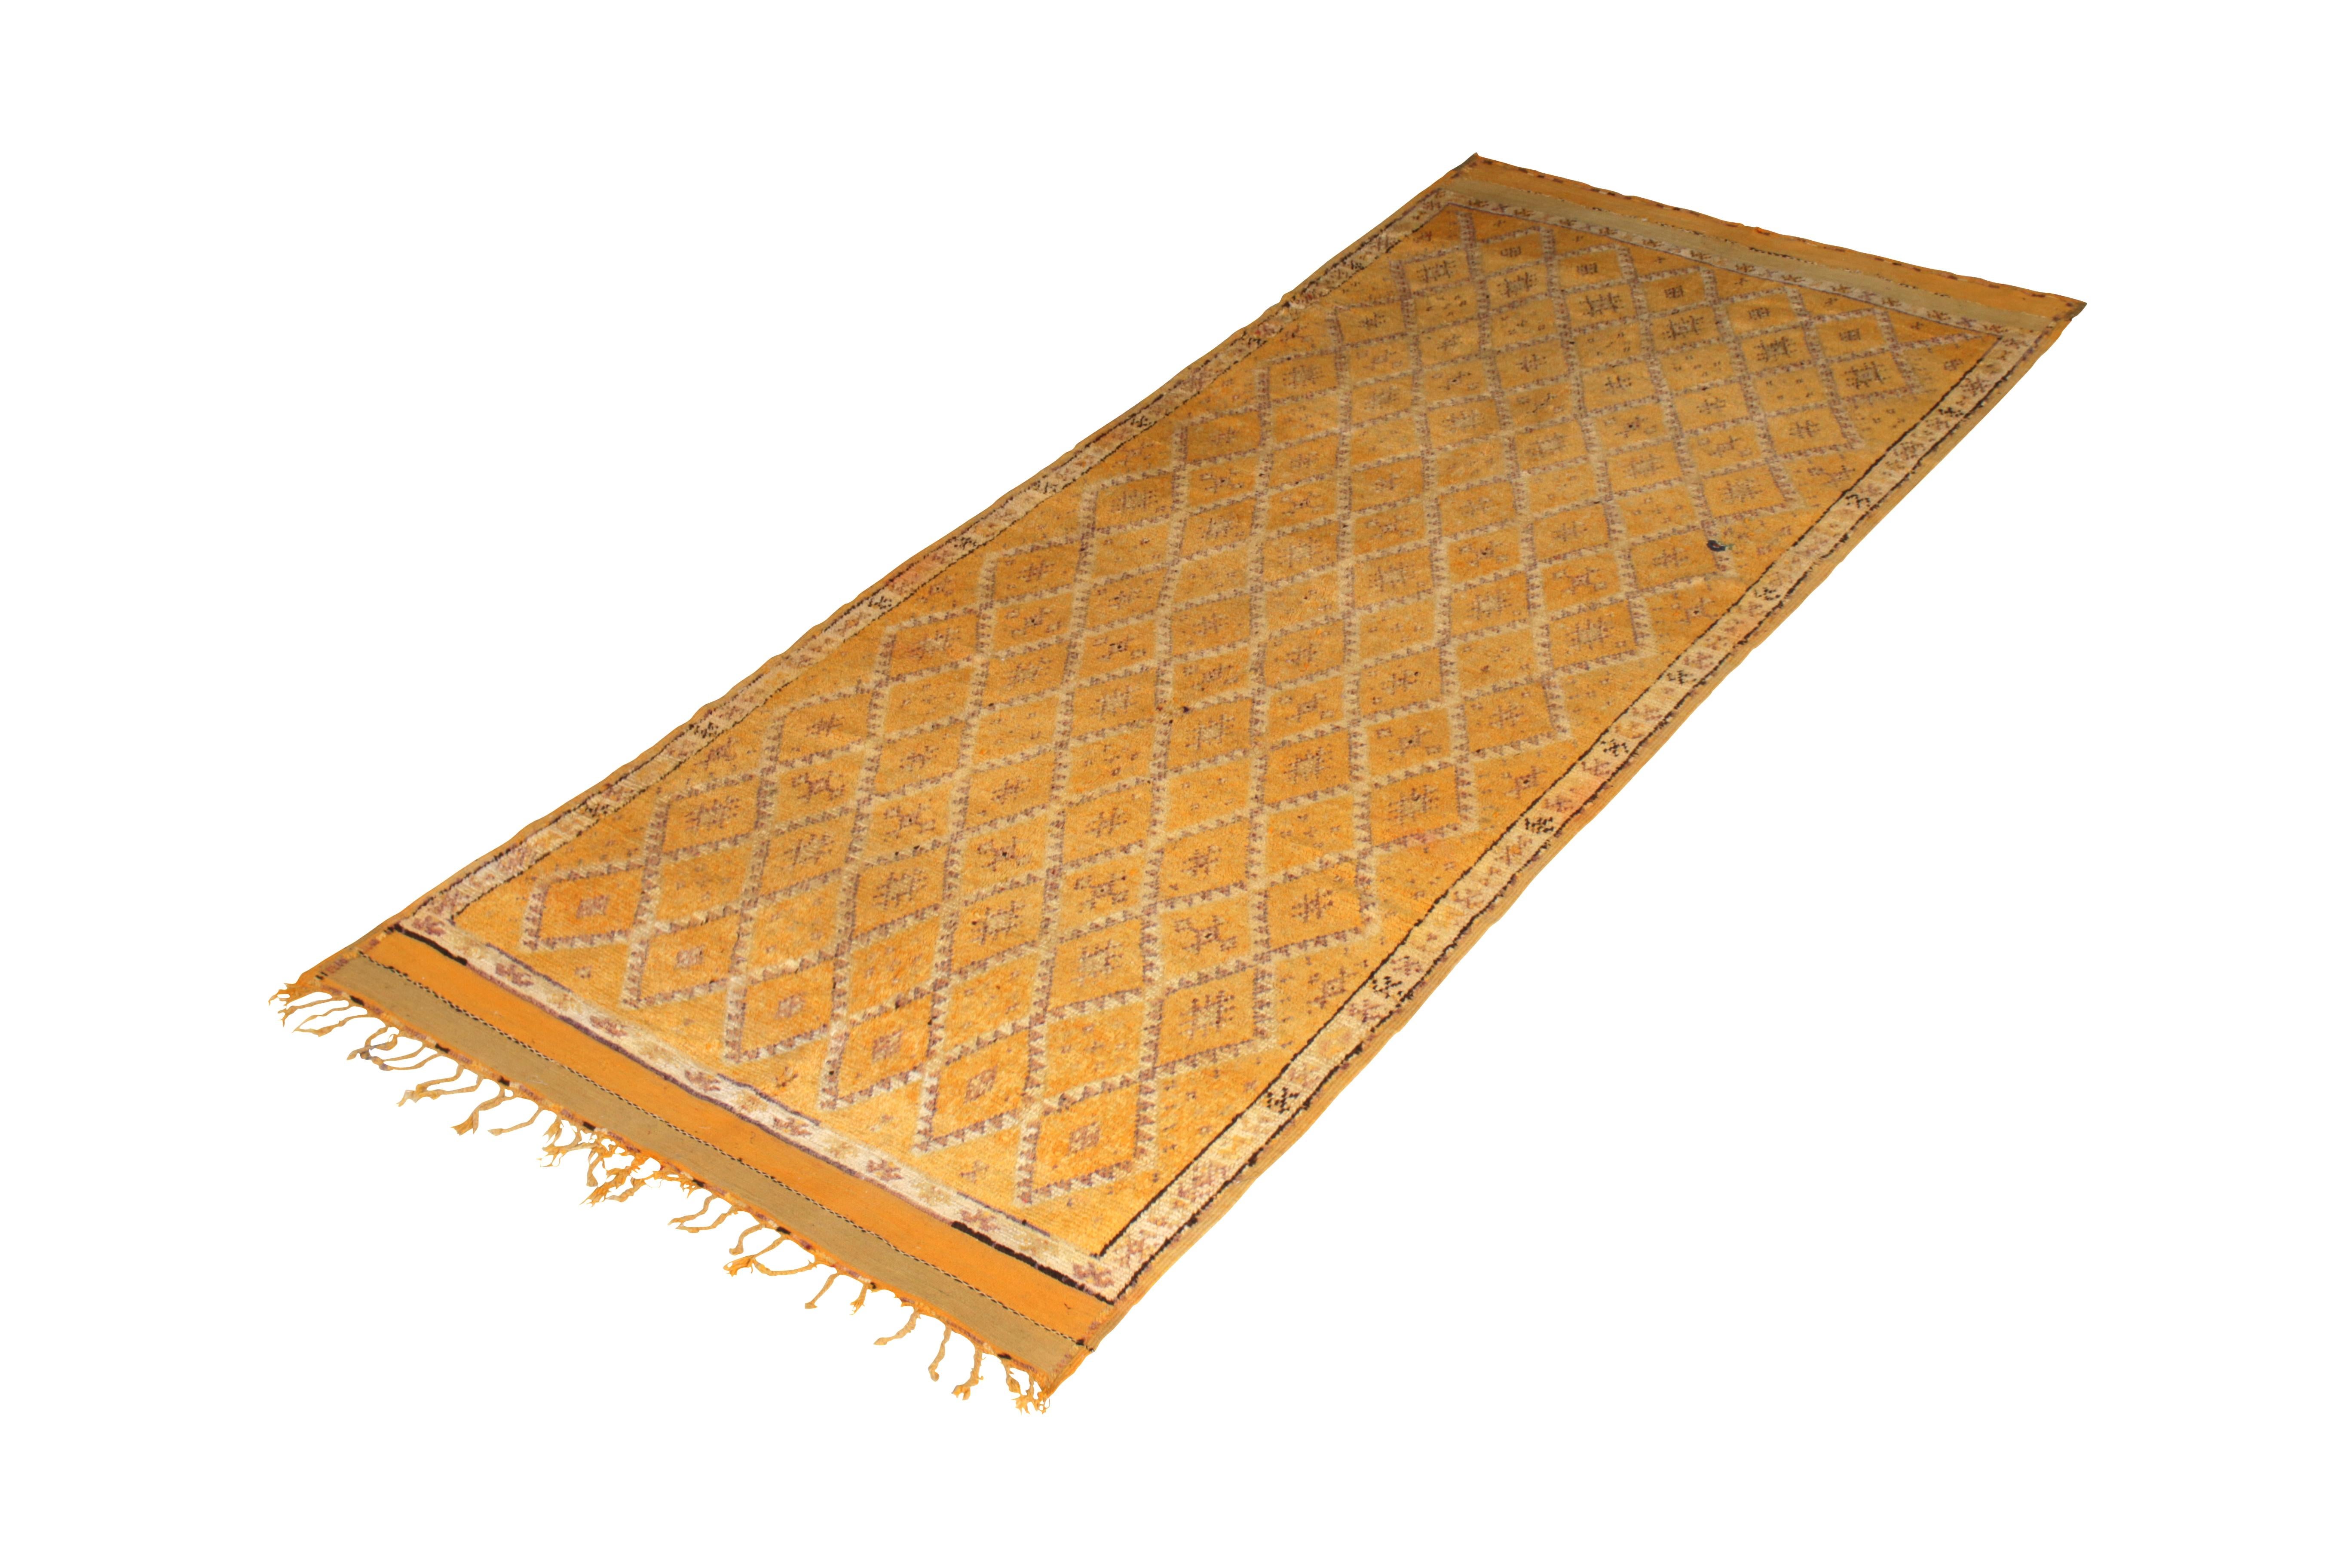 Hand knotted in wool originating from Morocco circa 1950-1960, this vintage mid-century Moroccan rug hails from the Berber tribal weavers of renown, among the most celebrated archetypal families of the hand knotted rug tradition. This particular